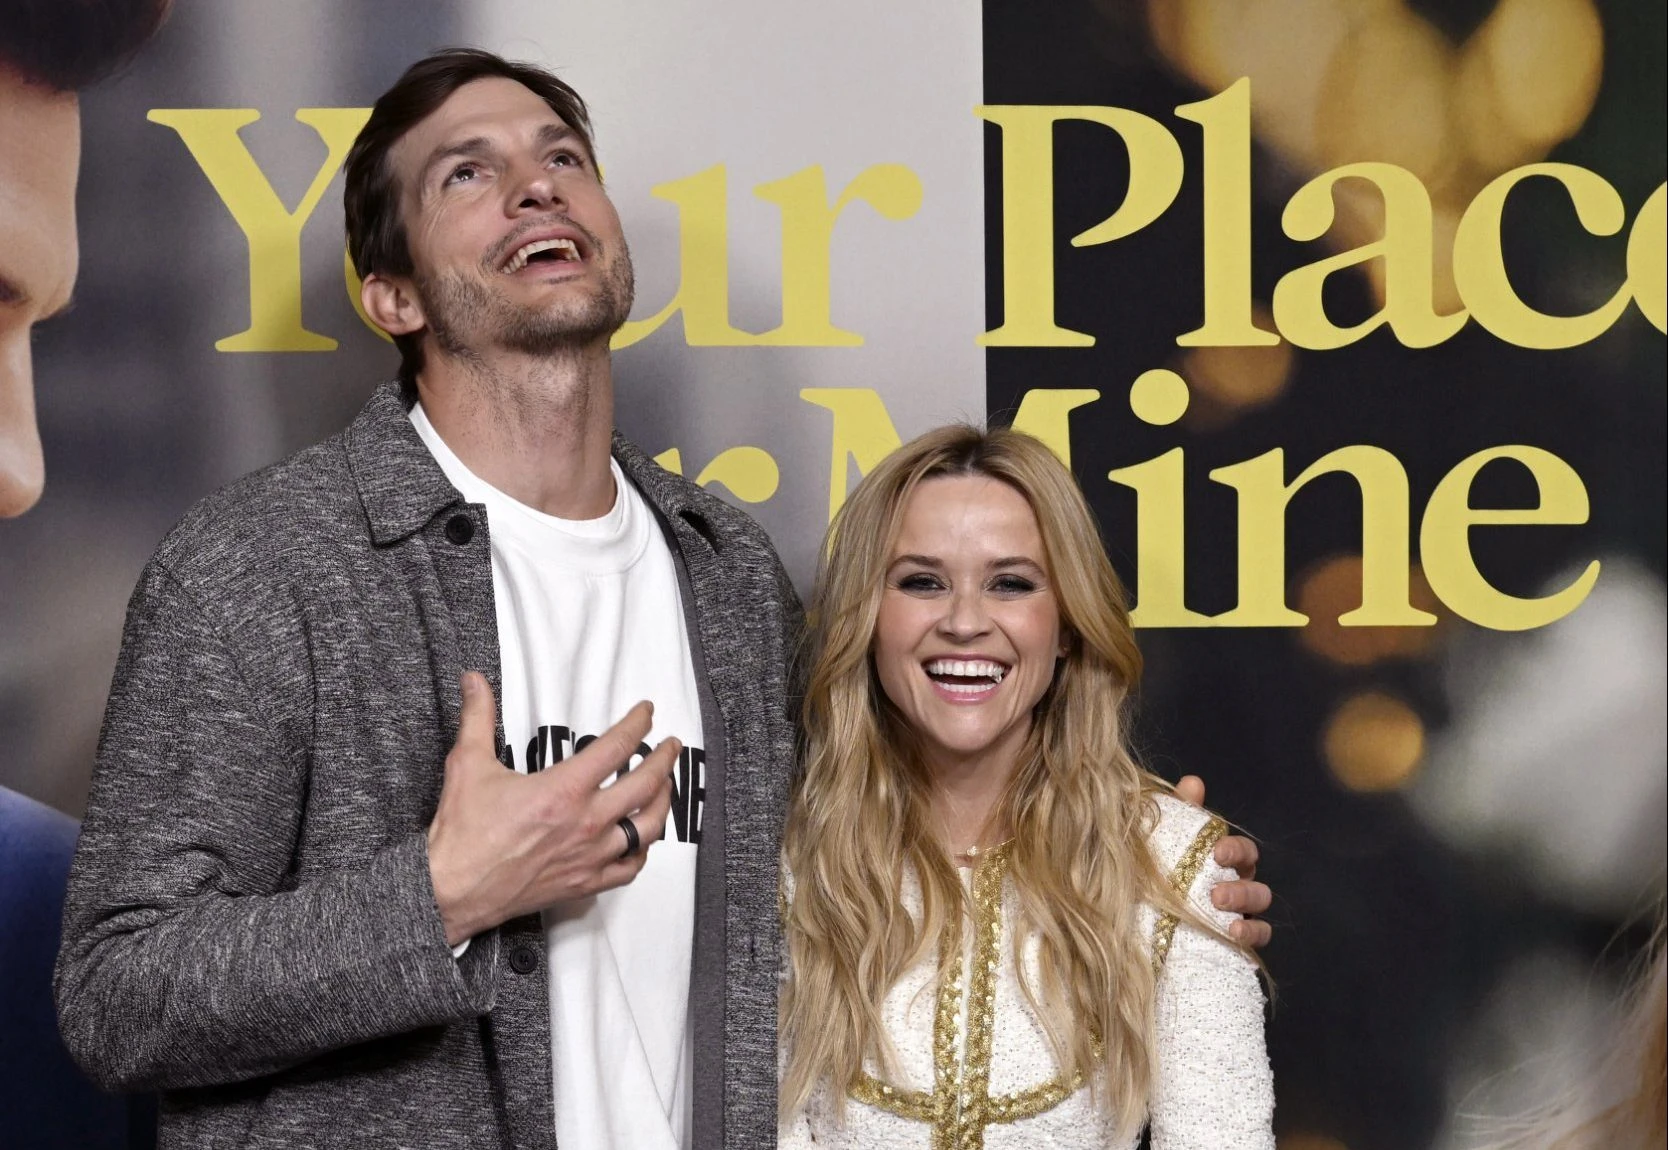 Ashton Kutcher and Reese Witherspoon